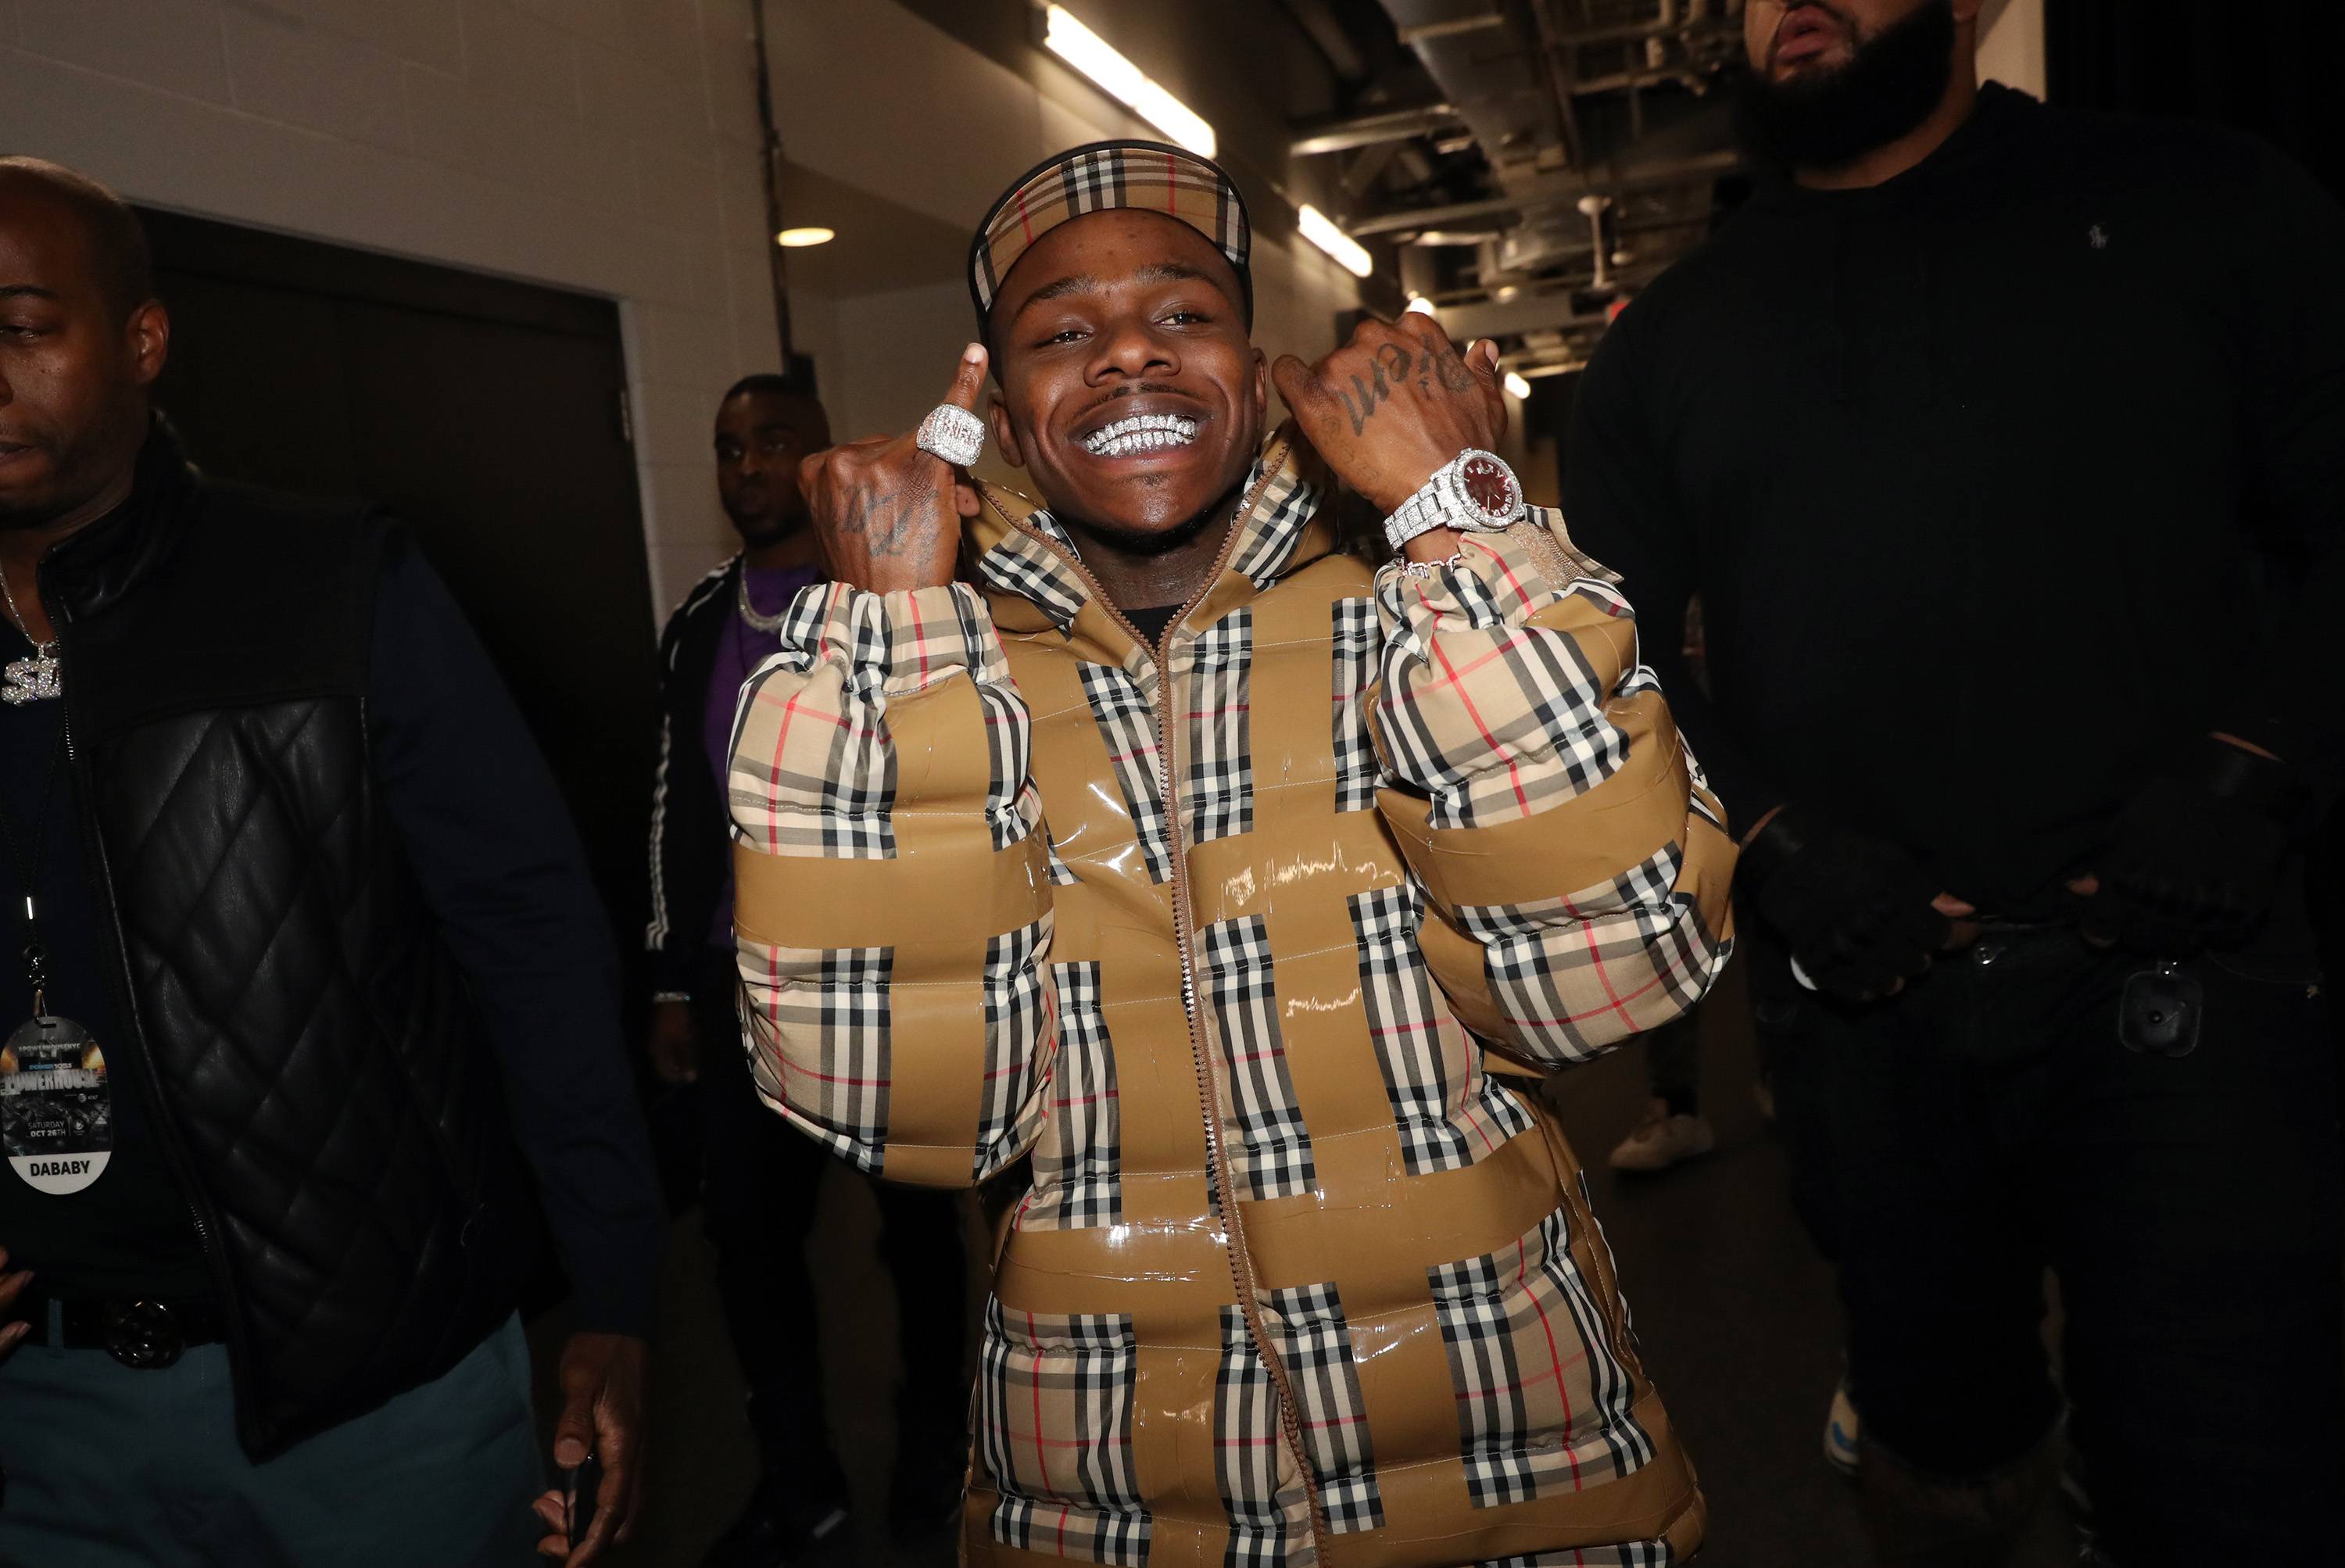 Instagram dababy: Clothes, Outfits, Brands, Style and Looks